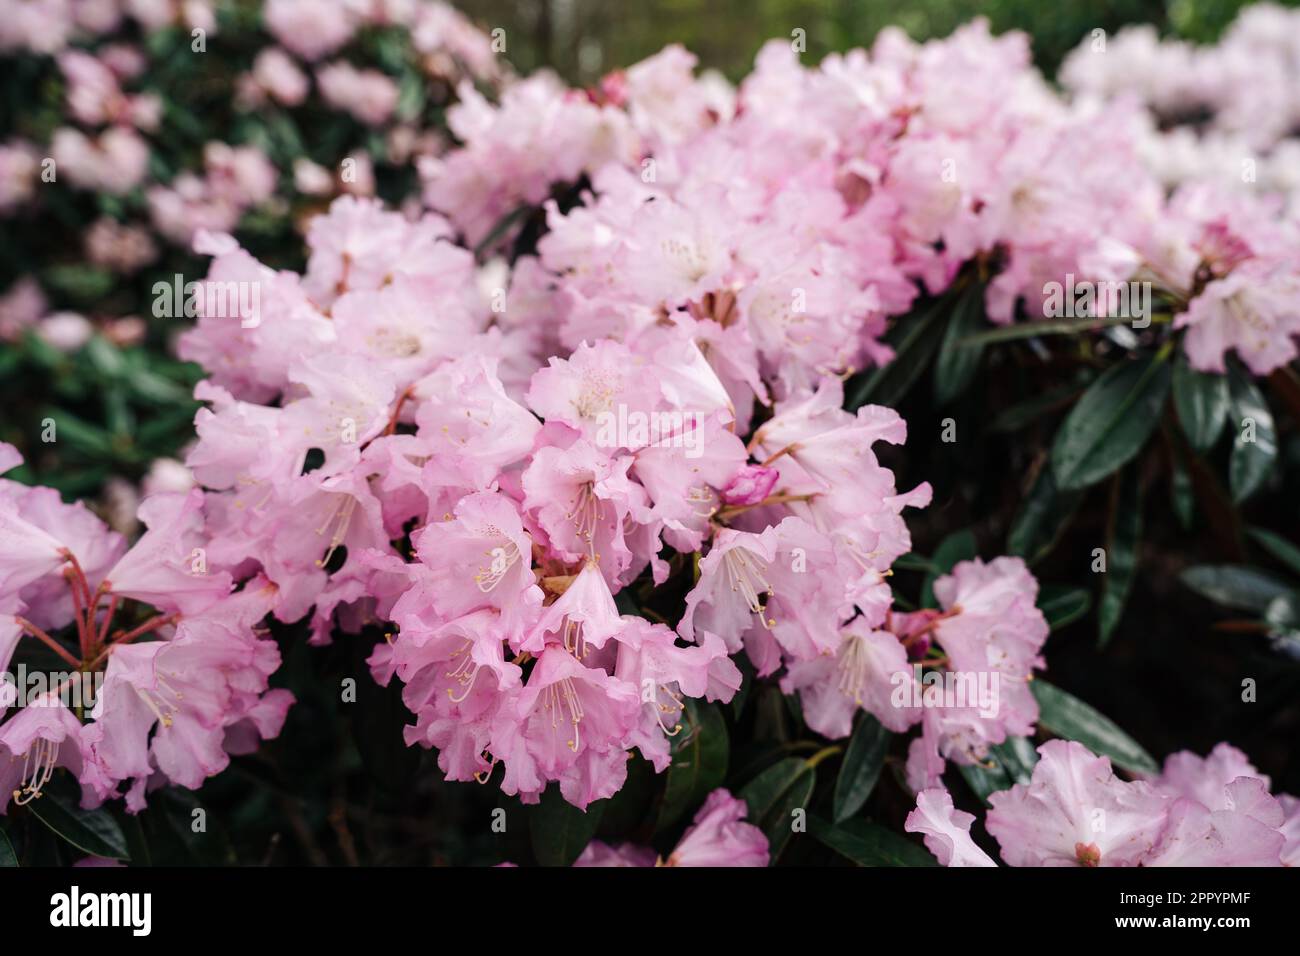 Flowering pink Rhododendron principis is an evergreen shrub growing 2 to 6 m tall with leathery leaves and pink flowers. Stock Photo